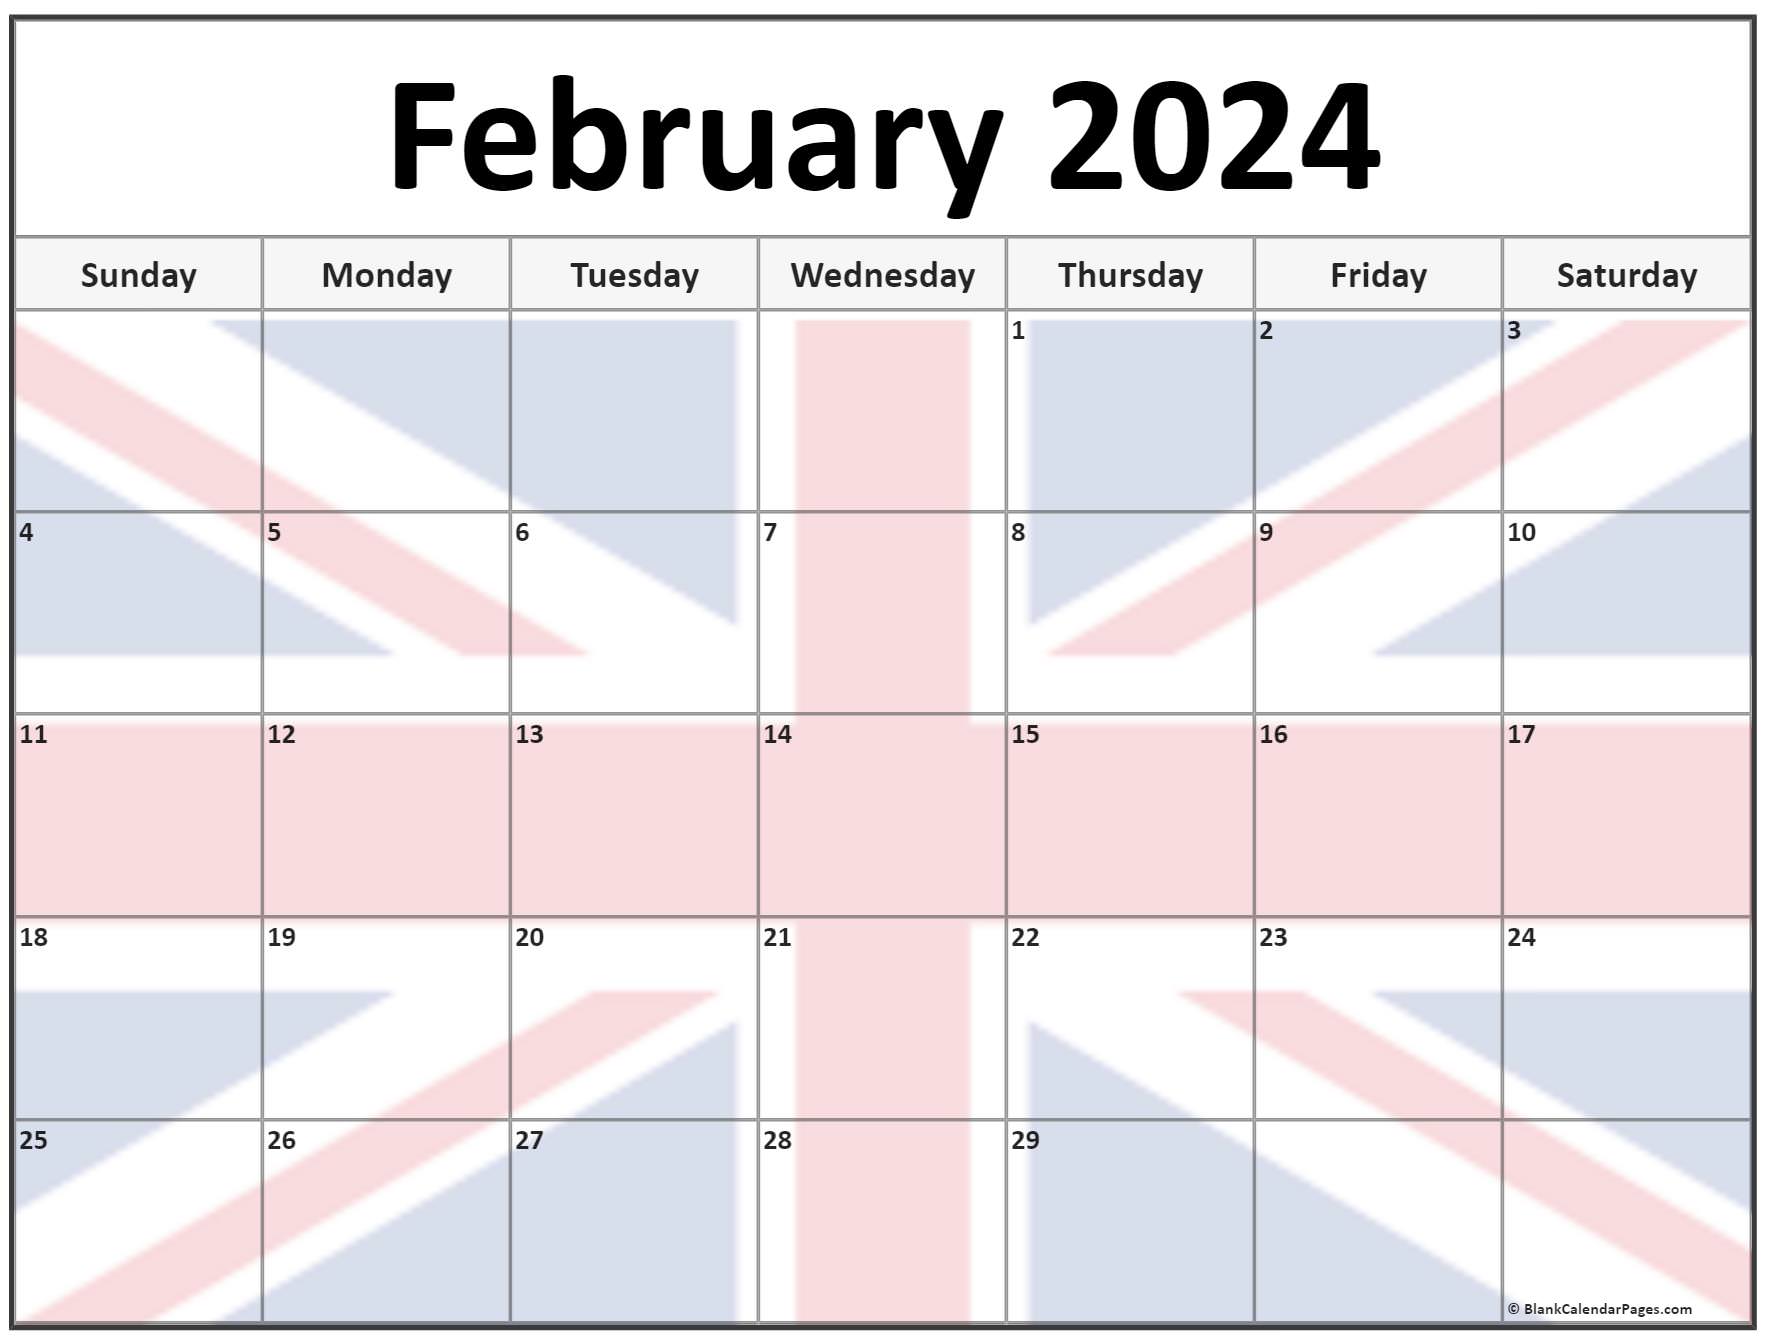 Collection of February 2022 photo calendars with image ...